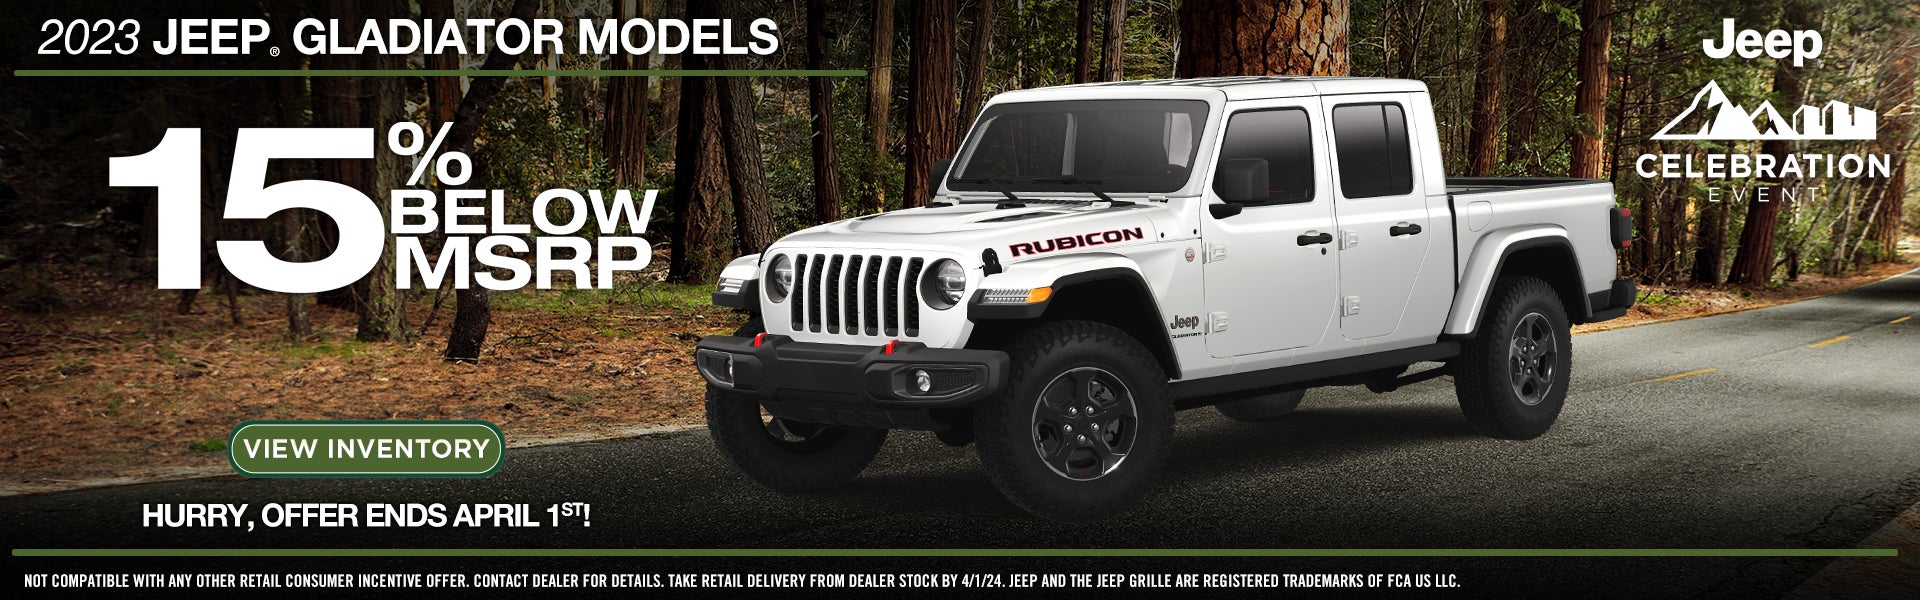 2023 Jeep Gladiator 4x4 are at least 15% off MSRP